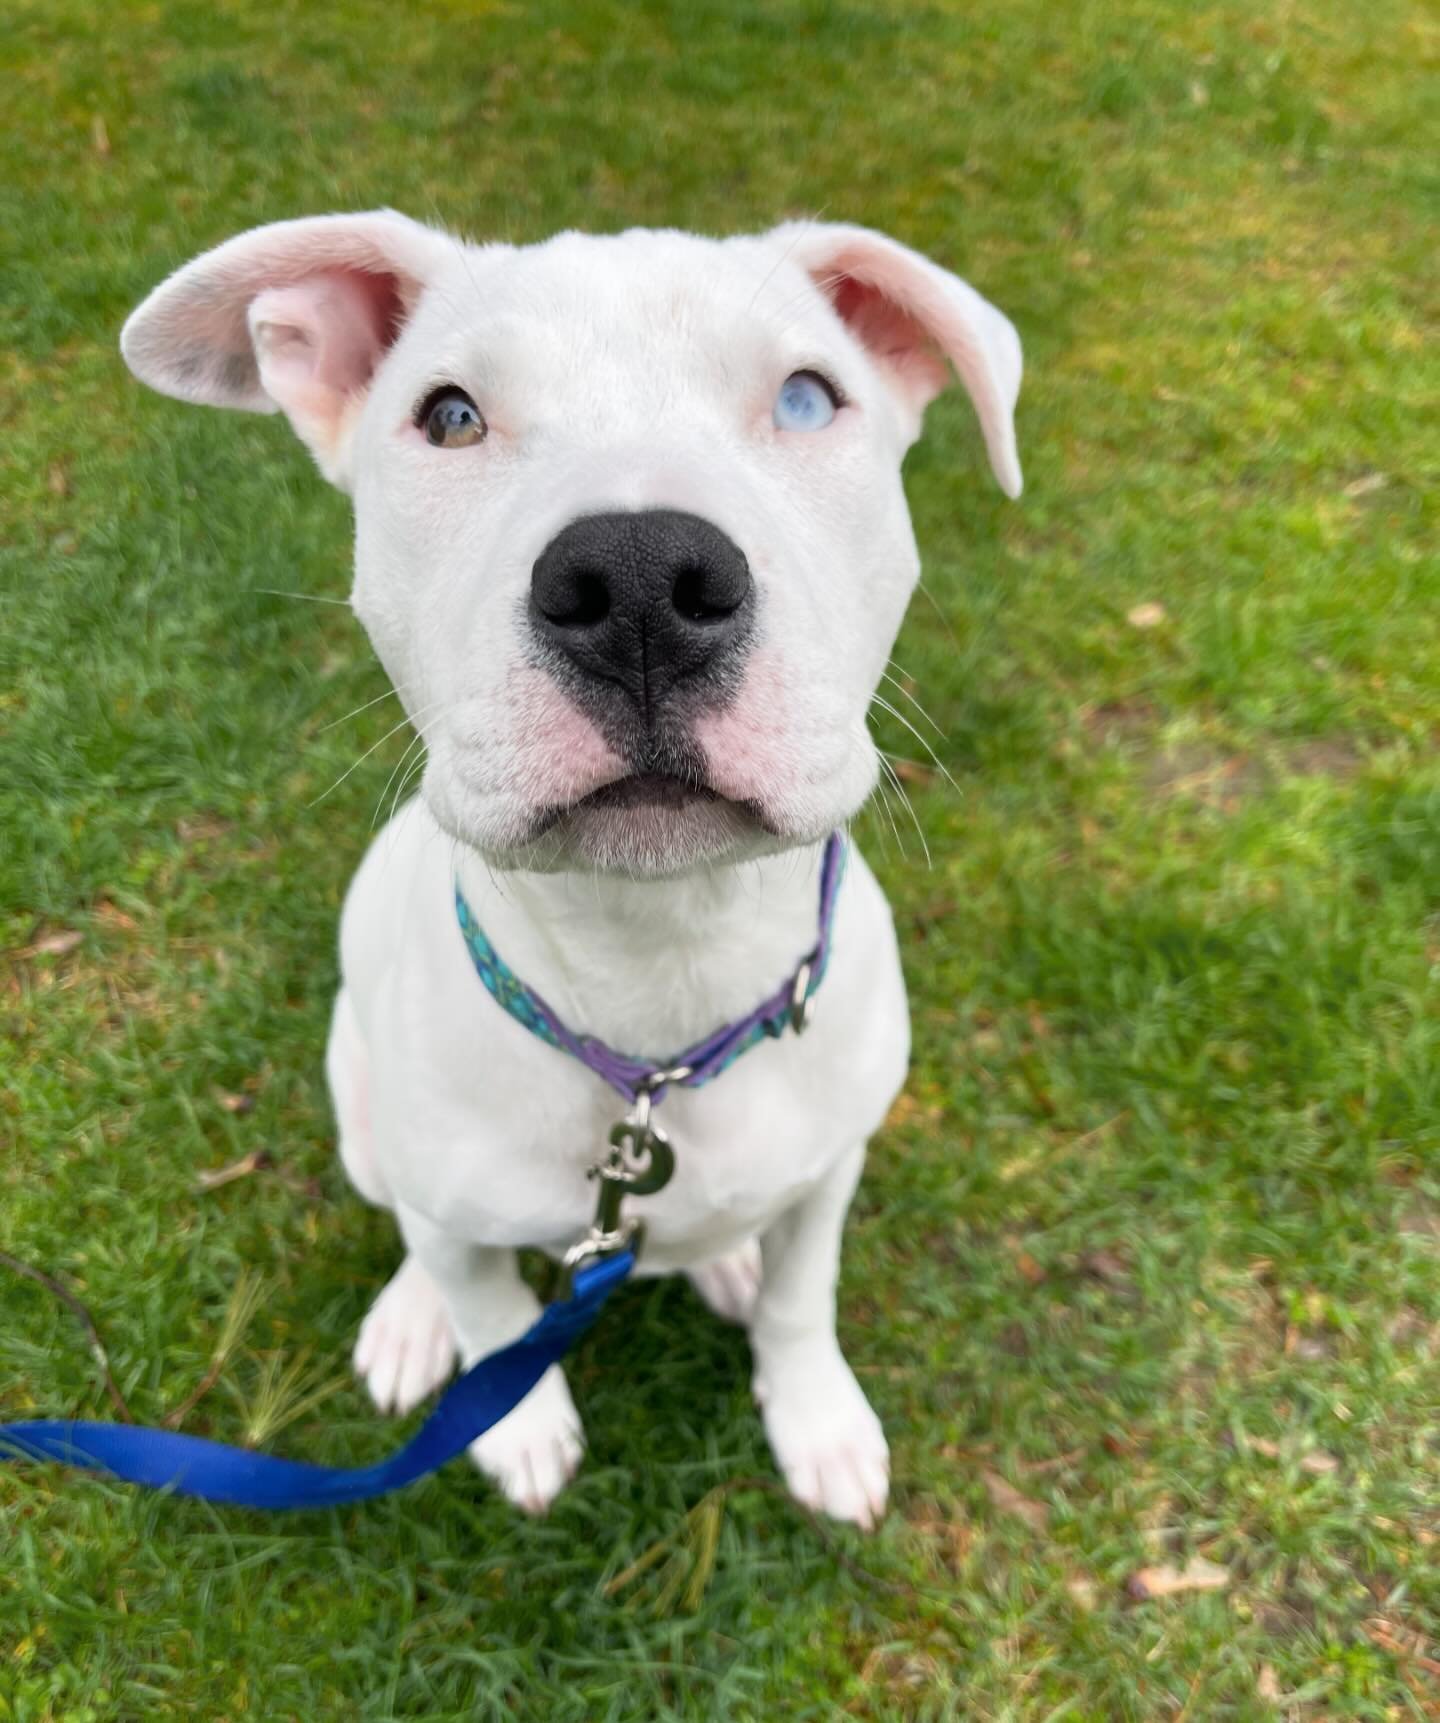 Welcome to the Port City Paws family, Deuce! 💙 

#rescuesofinstagram #adoptadog #portsmouthnh #dogfriendly #dogfriendlyportsmouth #dogwalker #petcare #puppylove #puppiesofinstagram #pittiesofinsta